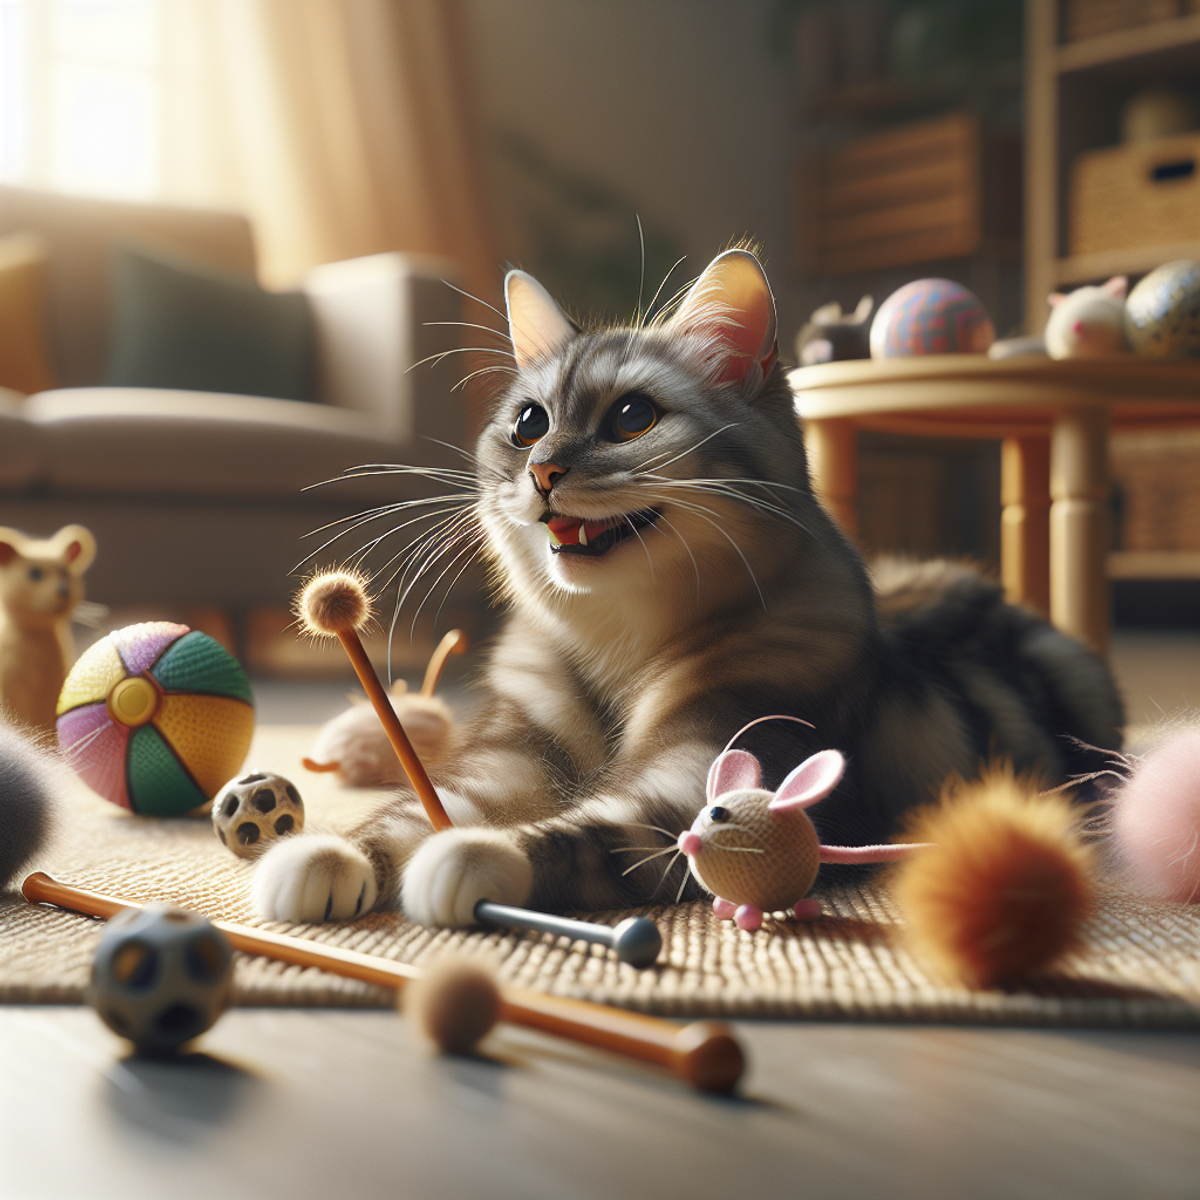 A senior cat happily playing with toys in a cozy living room.